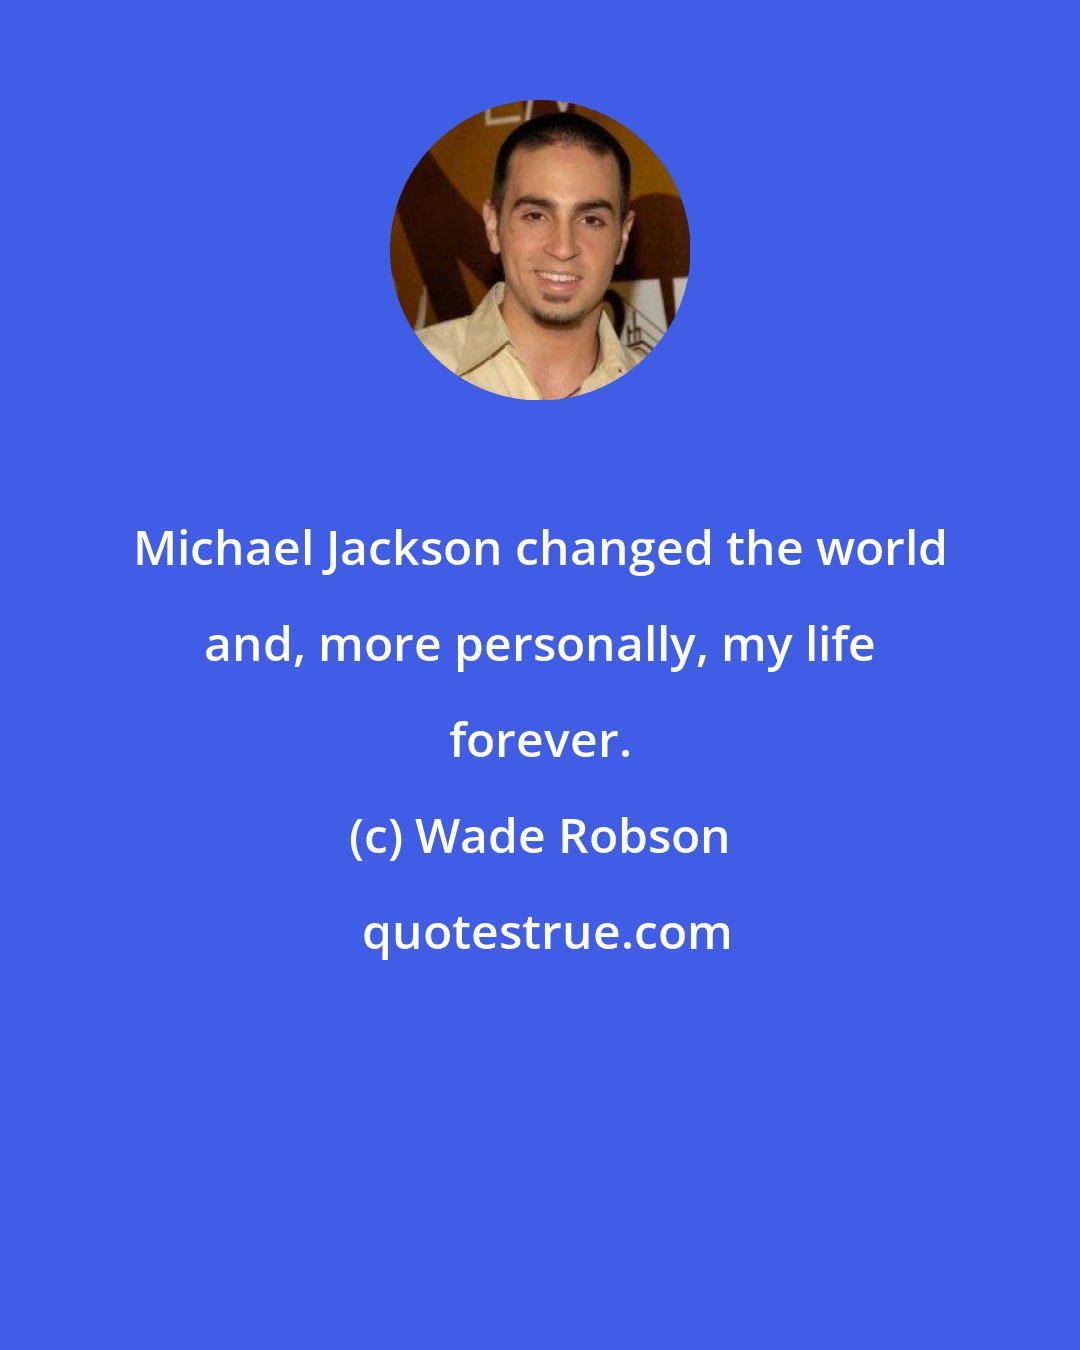 Wade Robson: Michael Jackson changed the world and, more personally, my life forever.